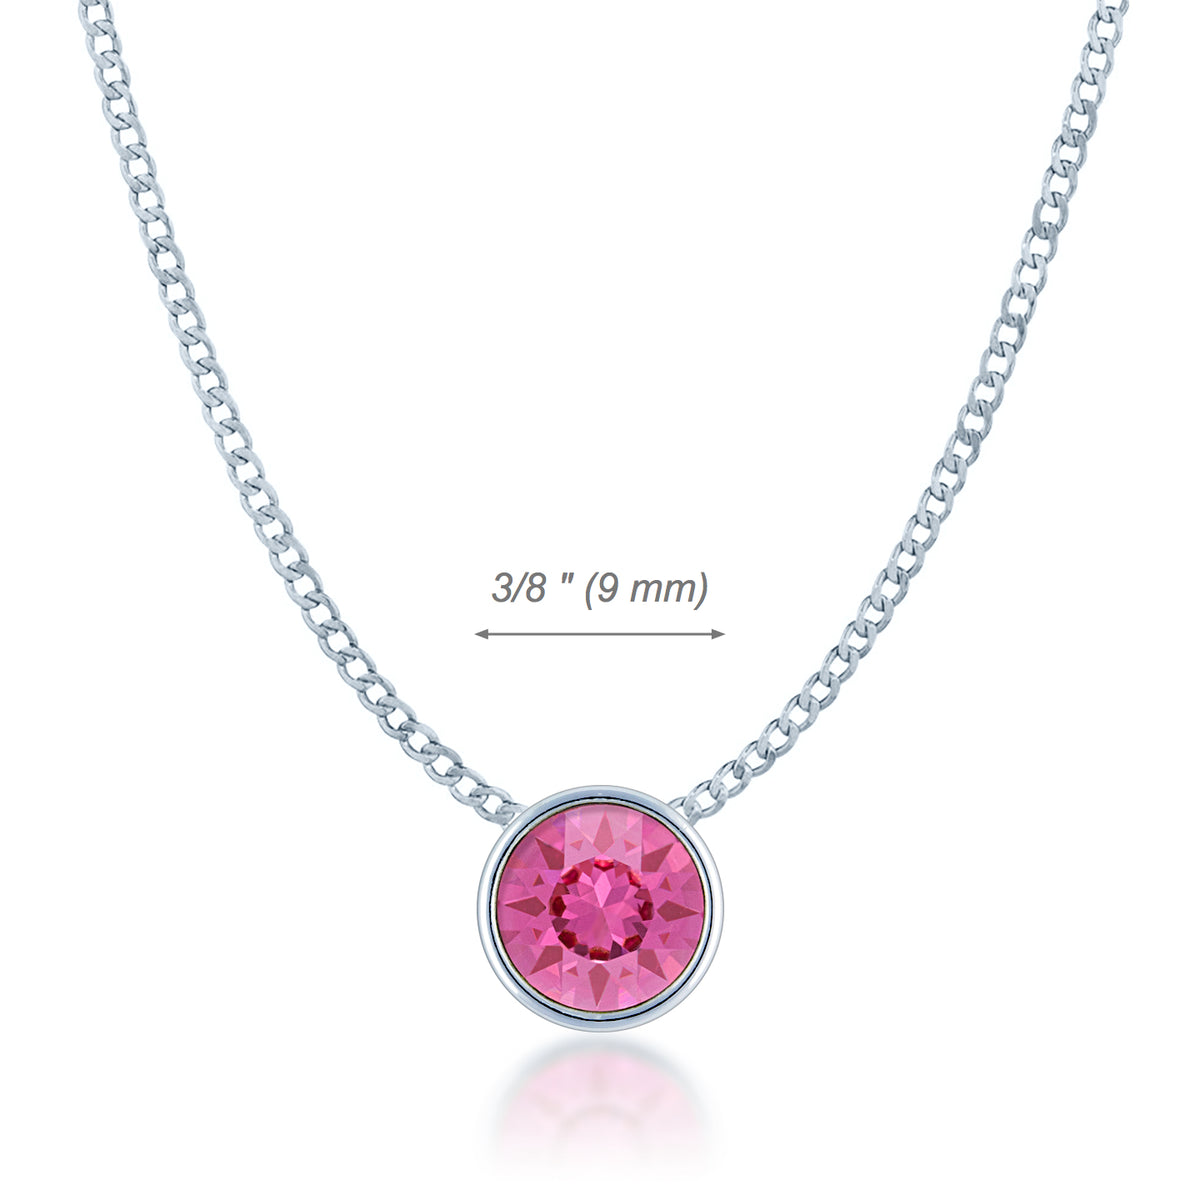 Harley Small Pendant Necklace with Pink Rose Round Crystals from Swarovski Silver Toned Rhodium Plated - Ed Heart